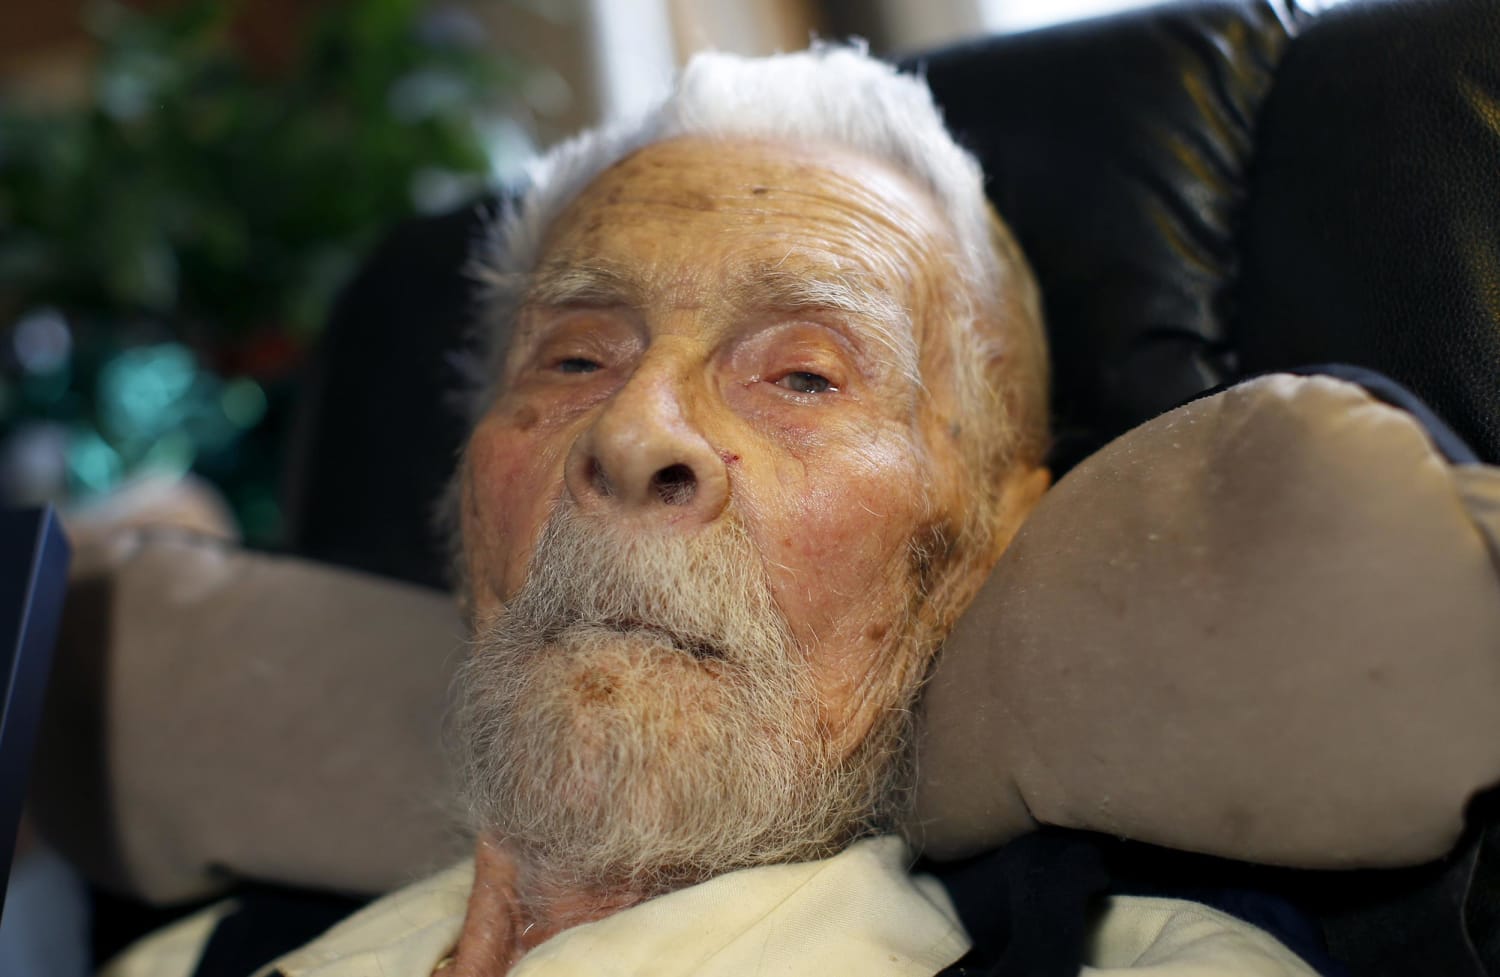 Oldest Man in the World Dies in New York at 111 NBC News